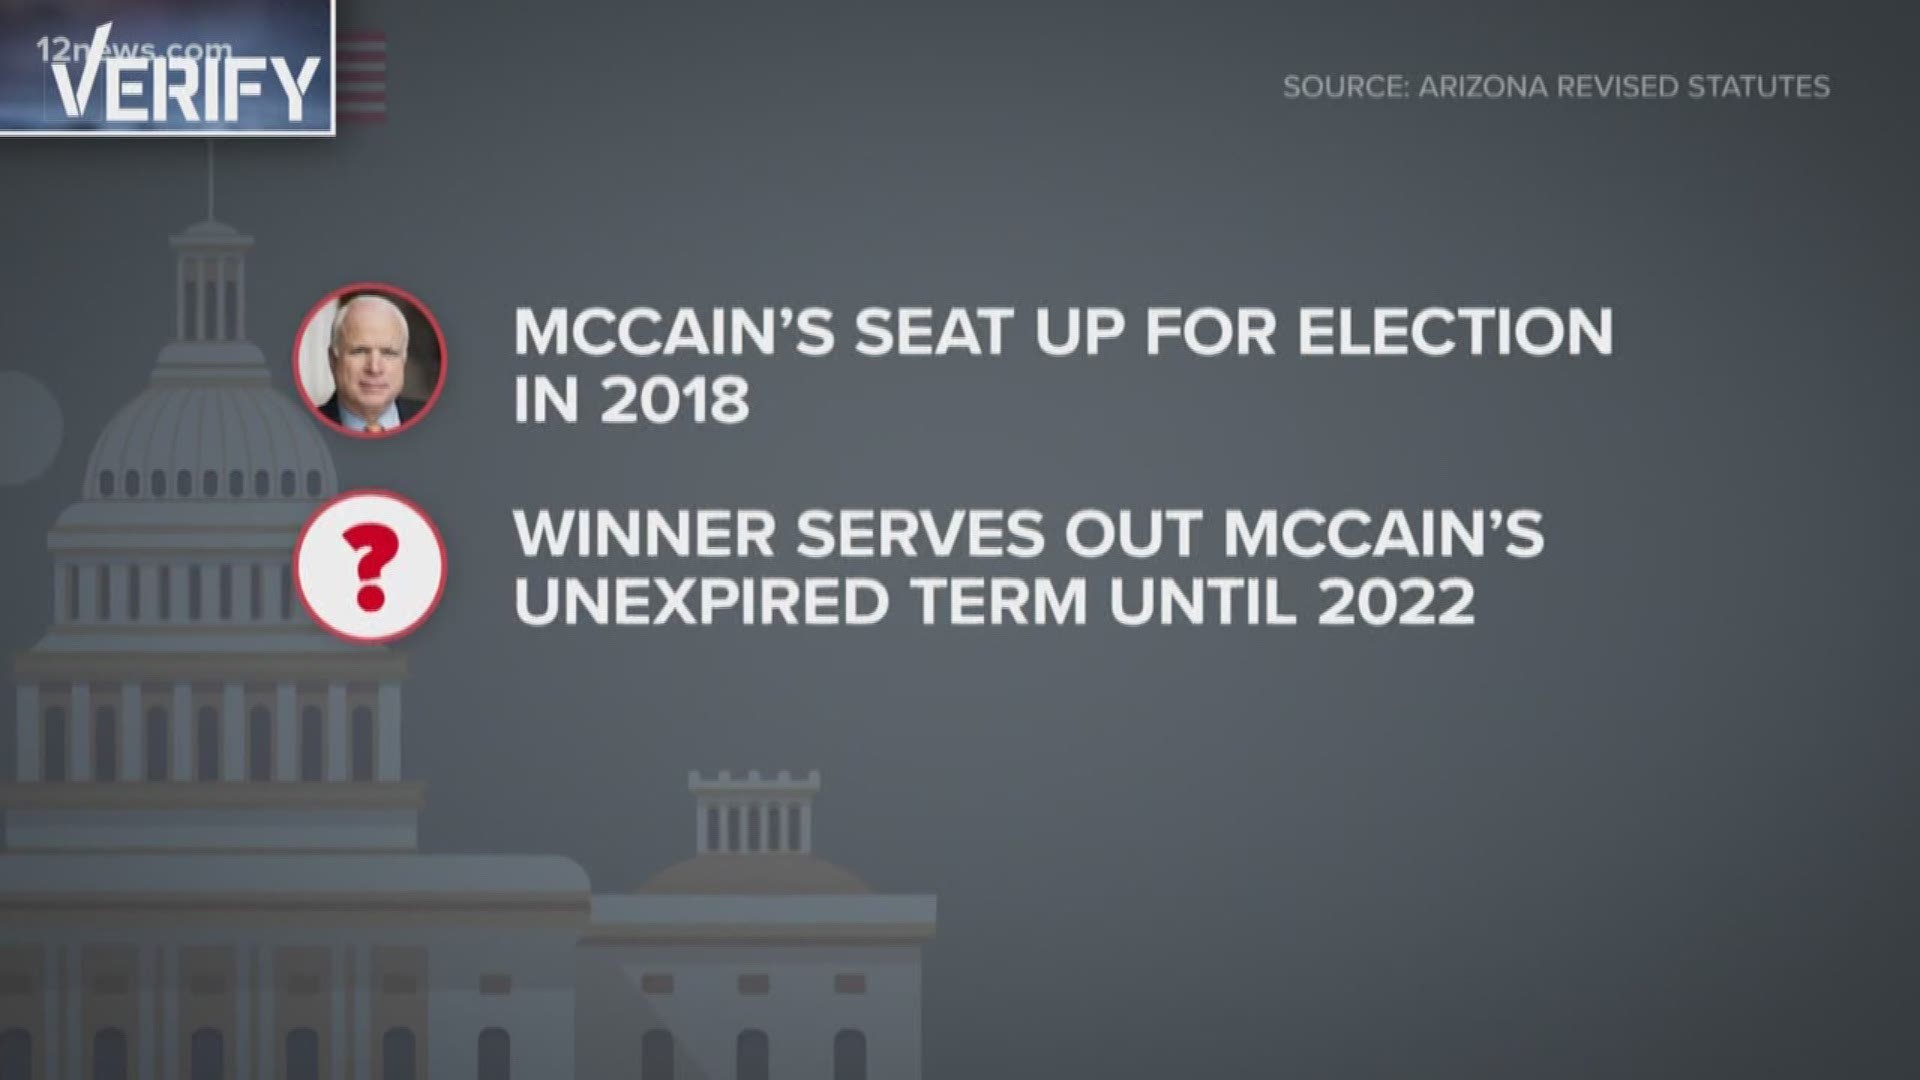 A look at what could happen under Arizona law if Sen. McCain decides to step down from the Senate.